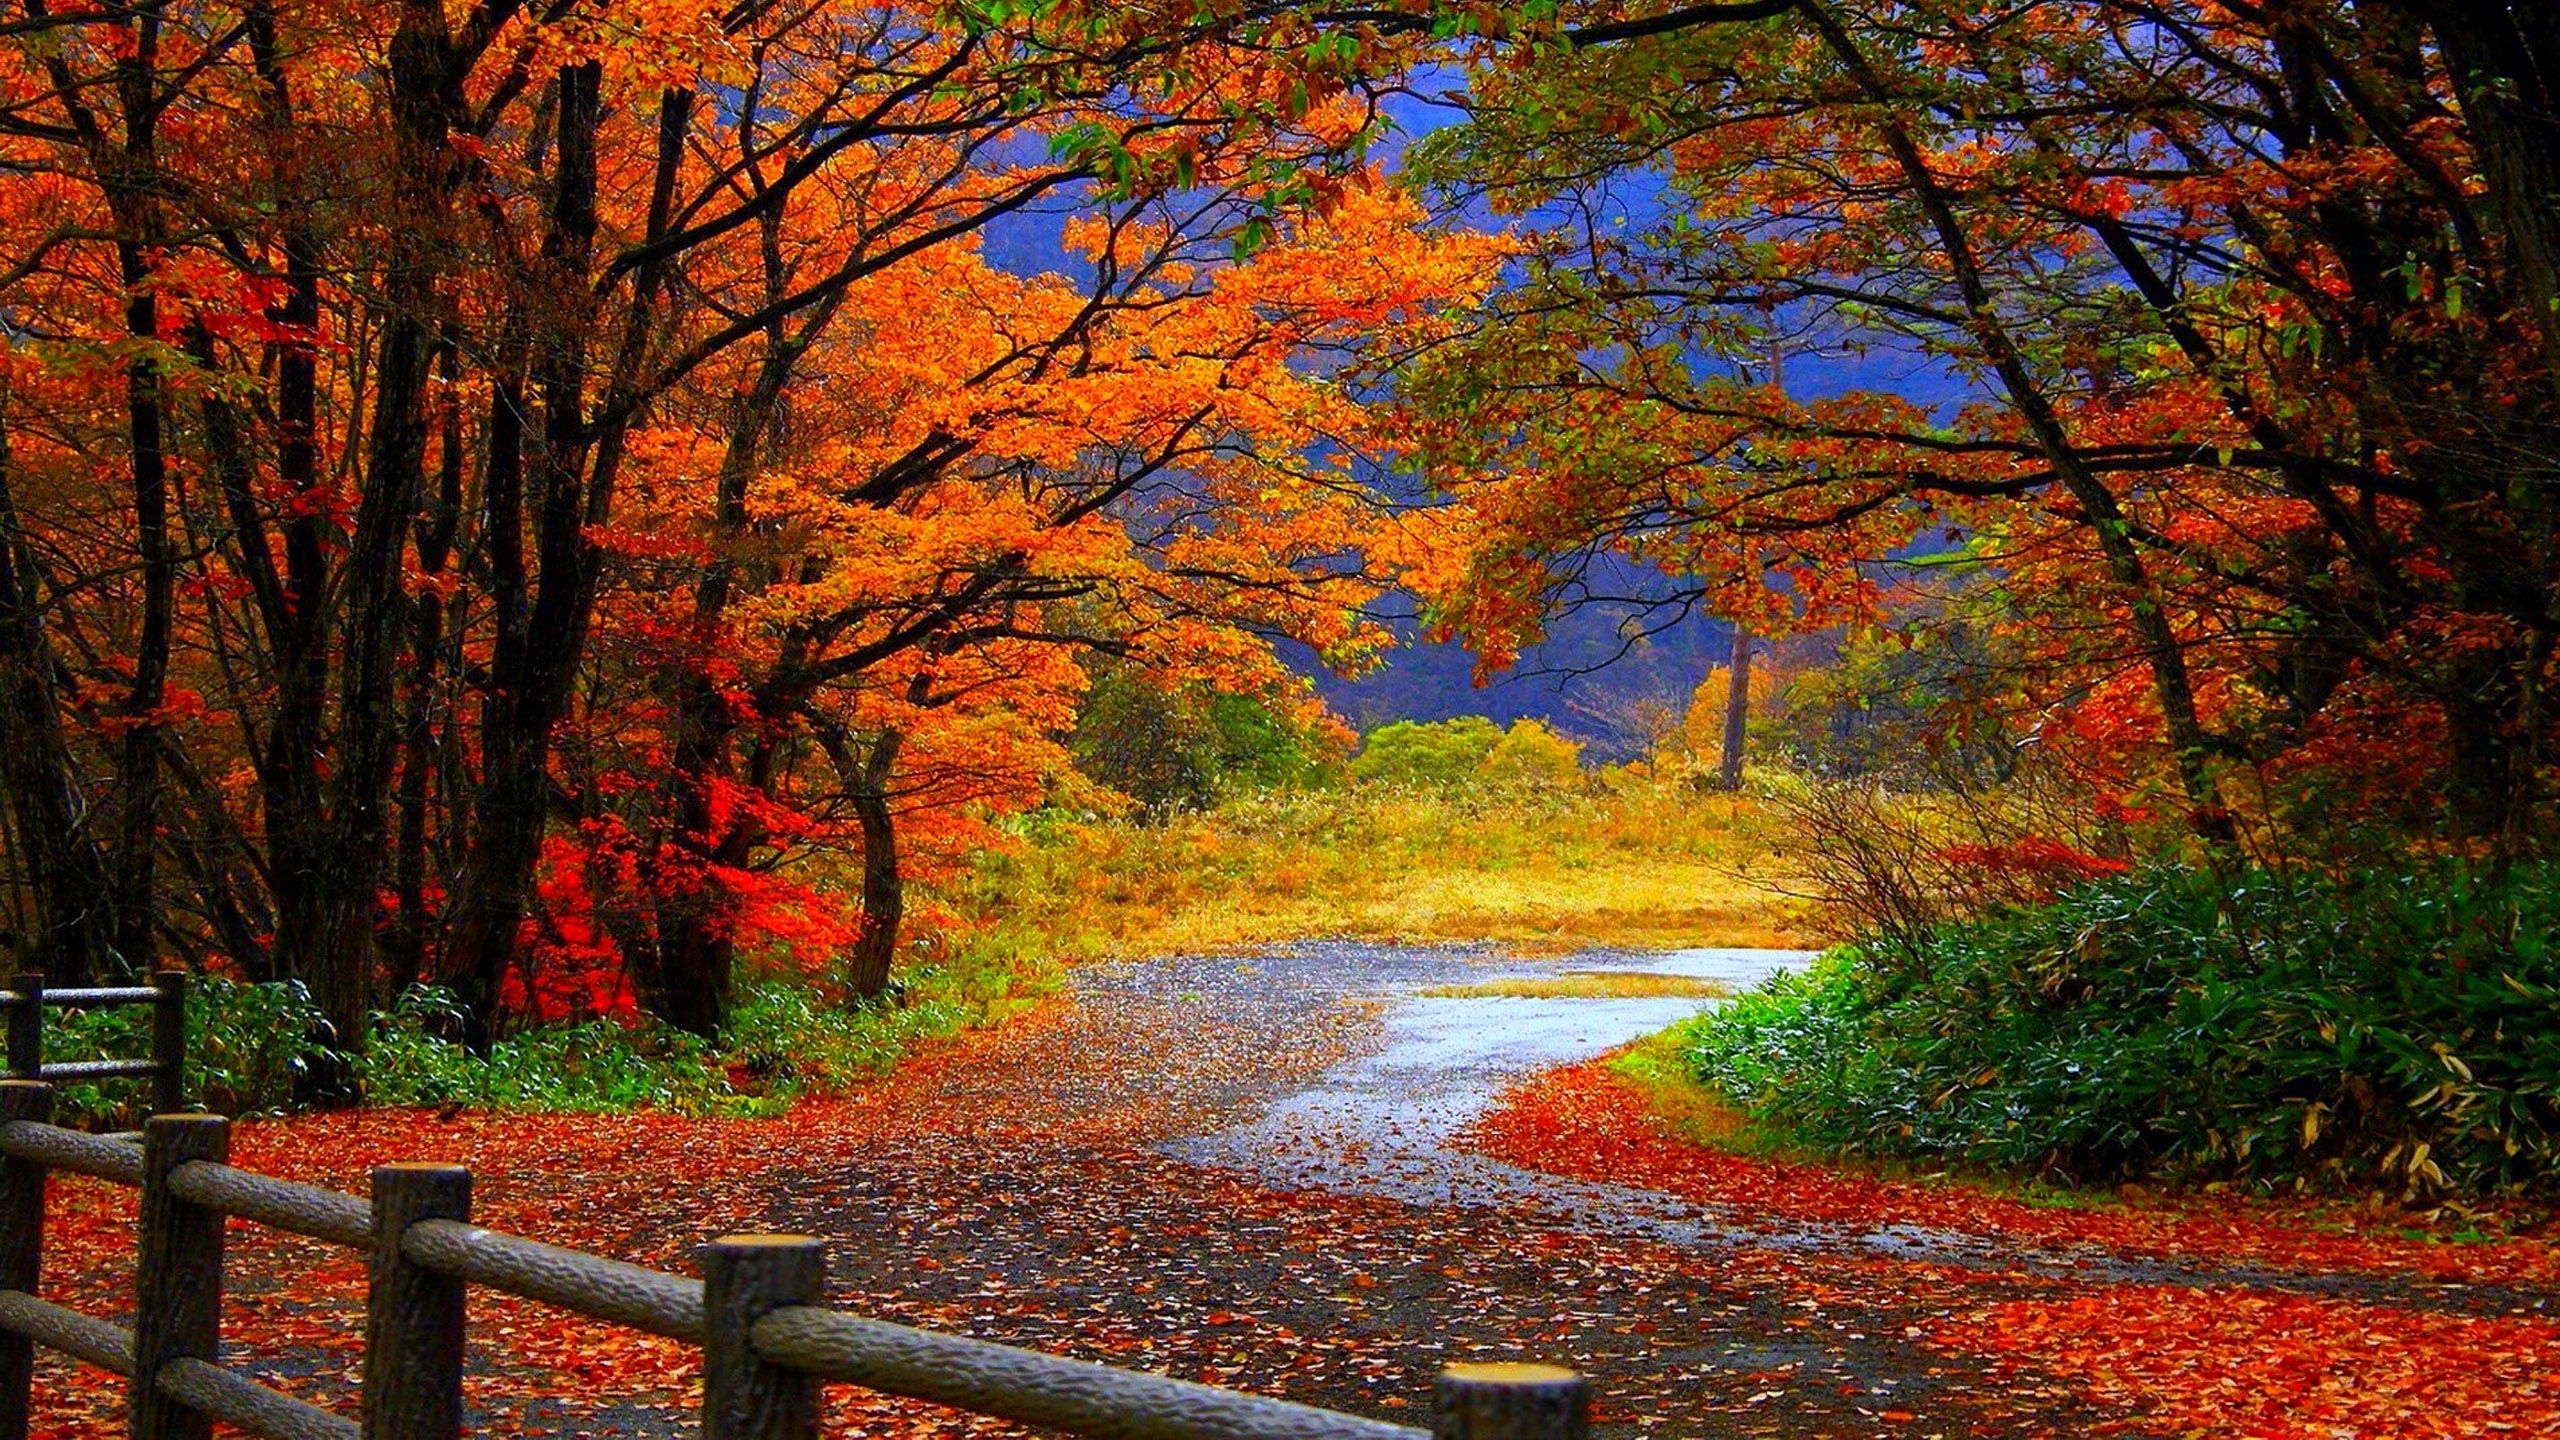 10 Best High Definition Autumn Wallpaper FULL HD 1080p For PC Background